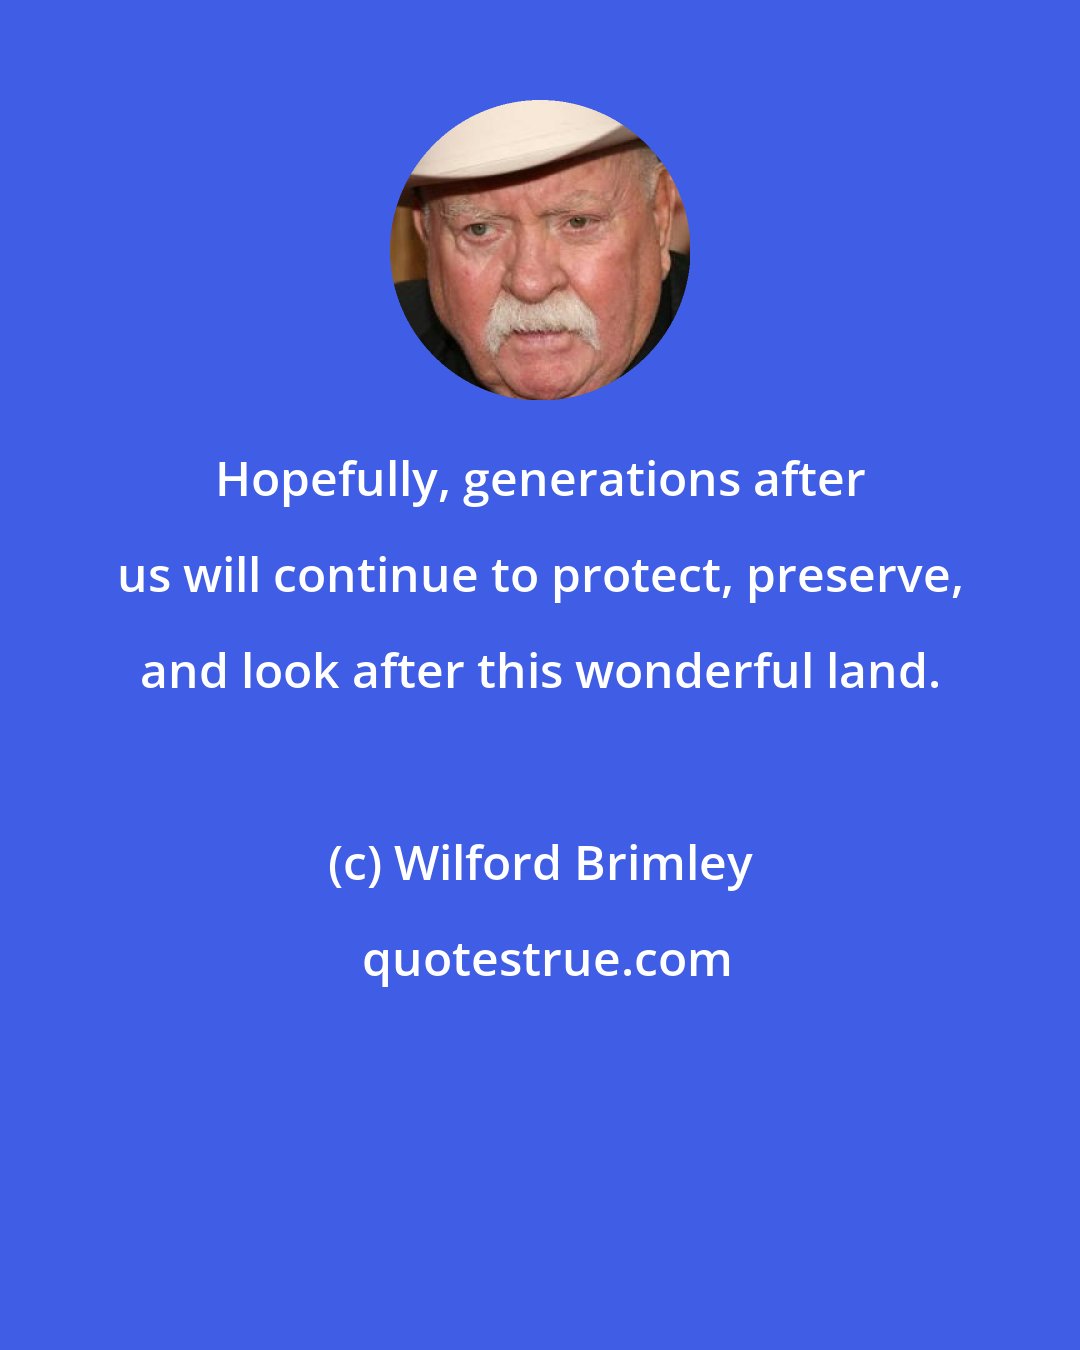 Wilford Brimley: Hopefully, generations after us will continue to protect, preserve, and look after this wonderful land.